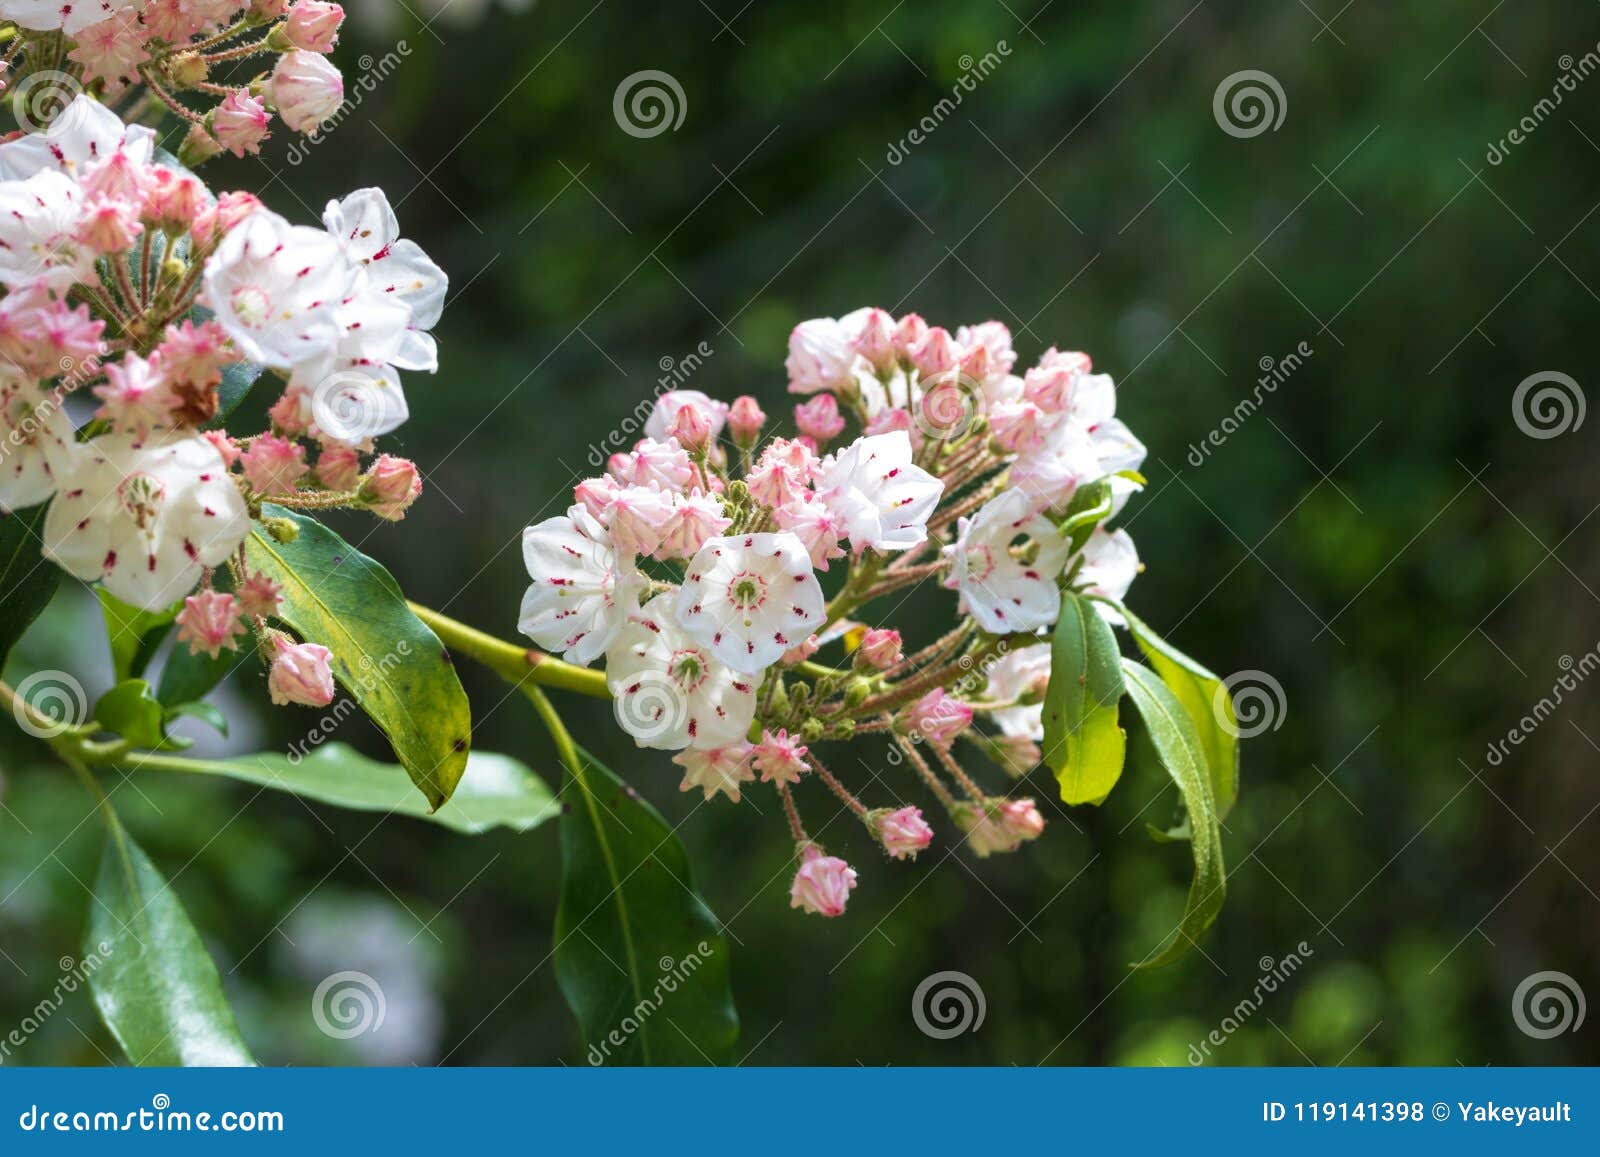 Mountain Laurel Flowers In Bloom Stock Photo Image Of Shrub Nature 119141398